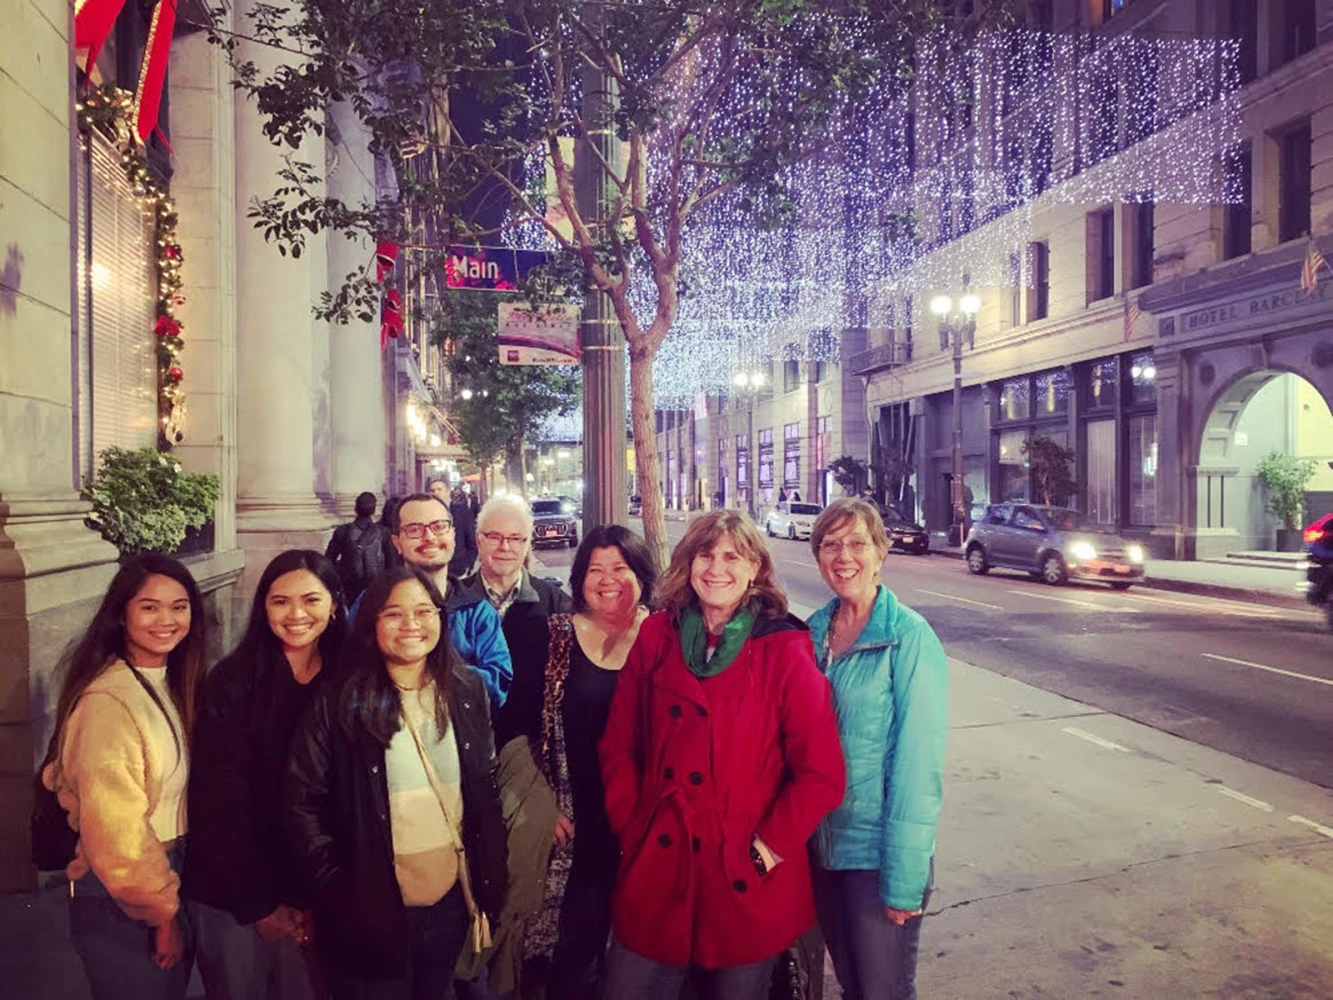 DTLA Murder Mystery Ghost Tour: What to expect - 6